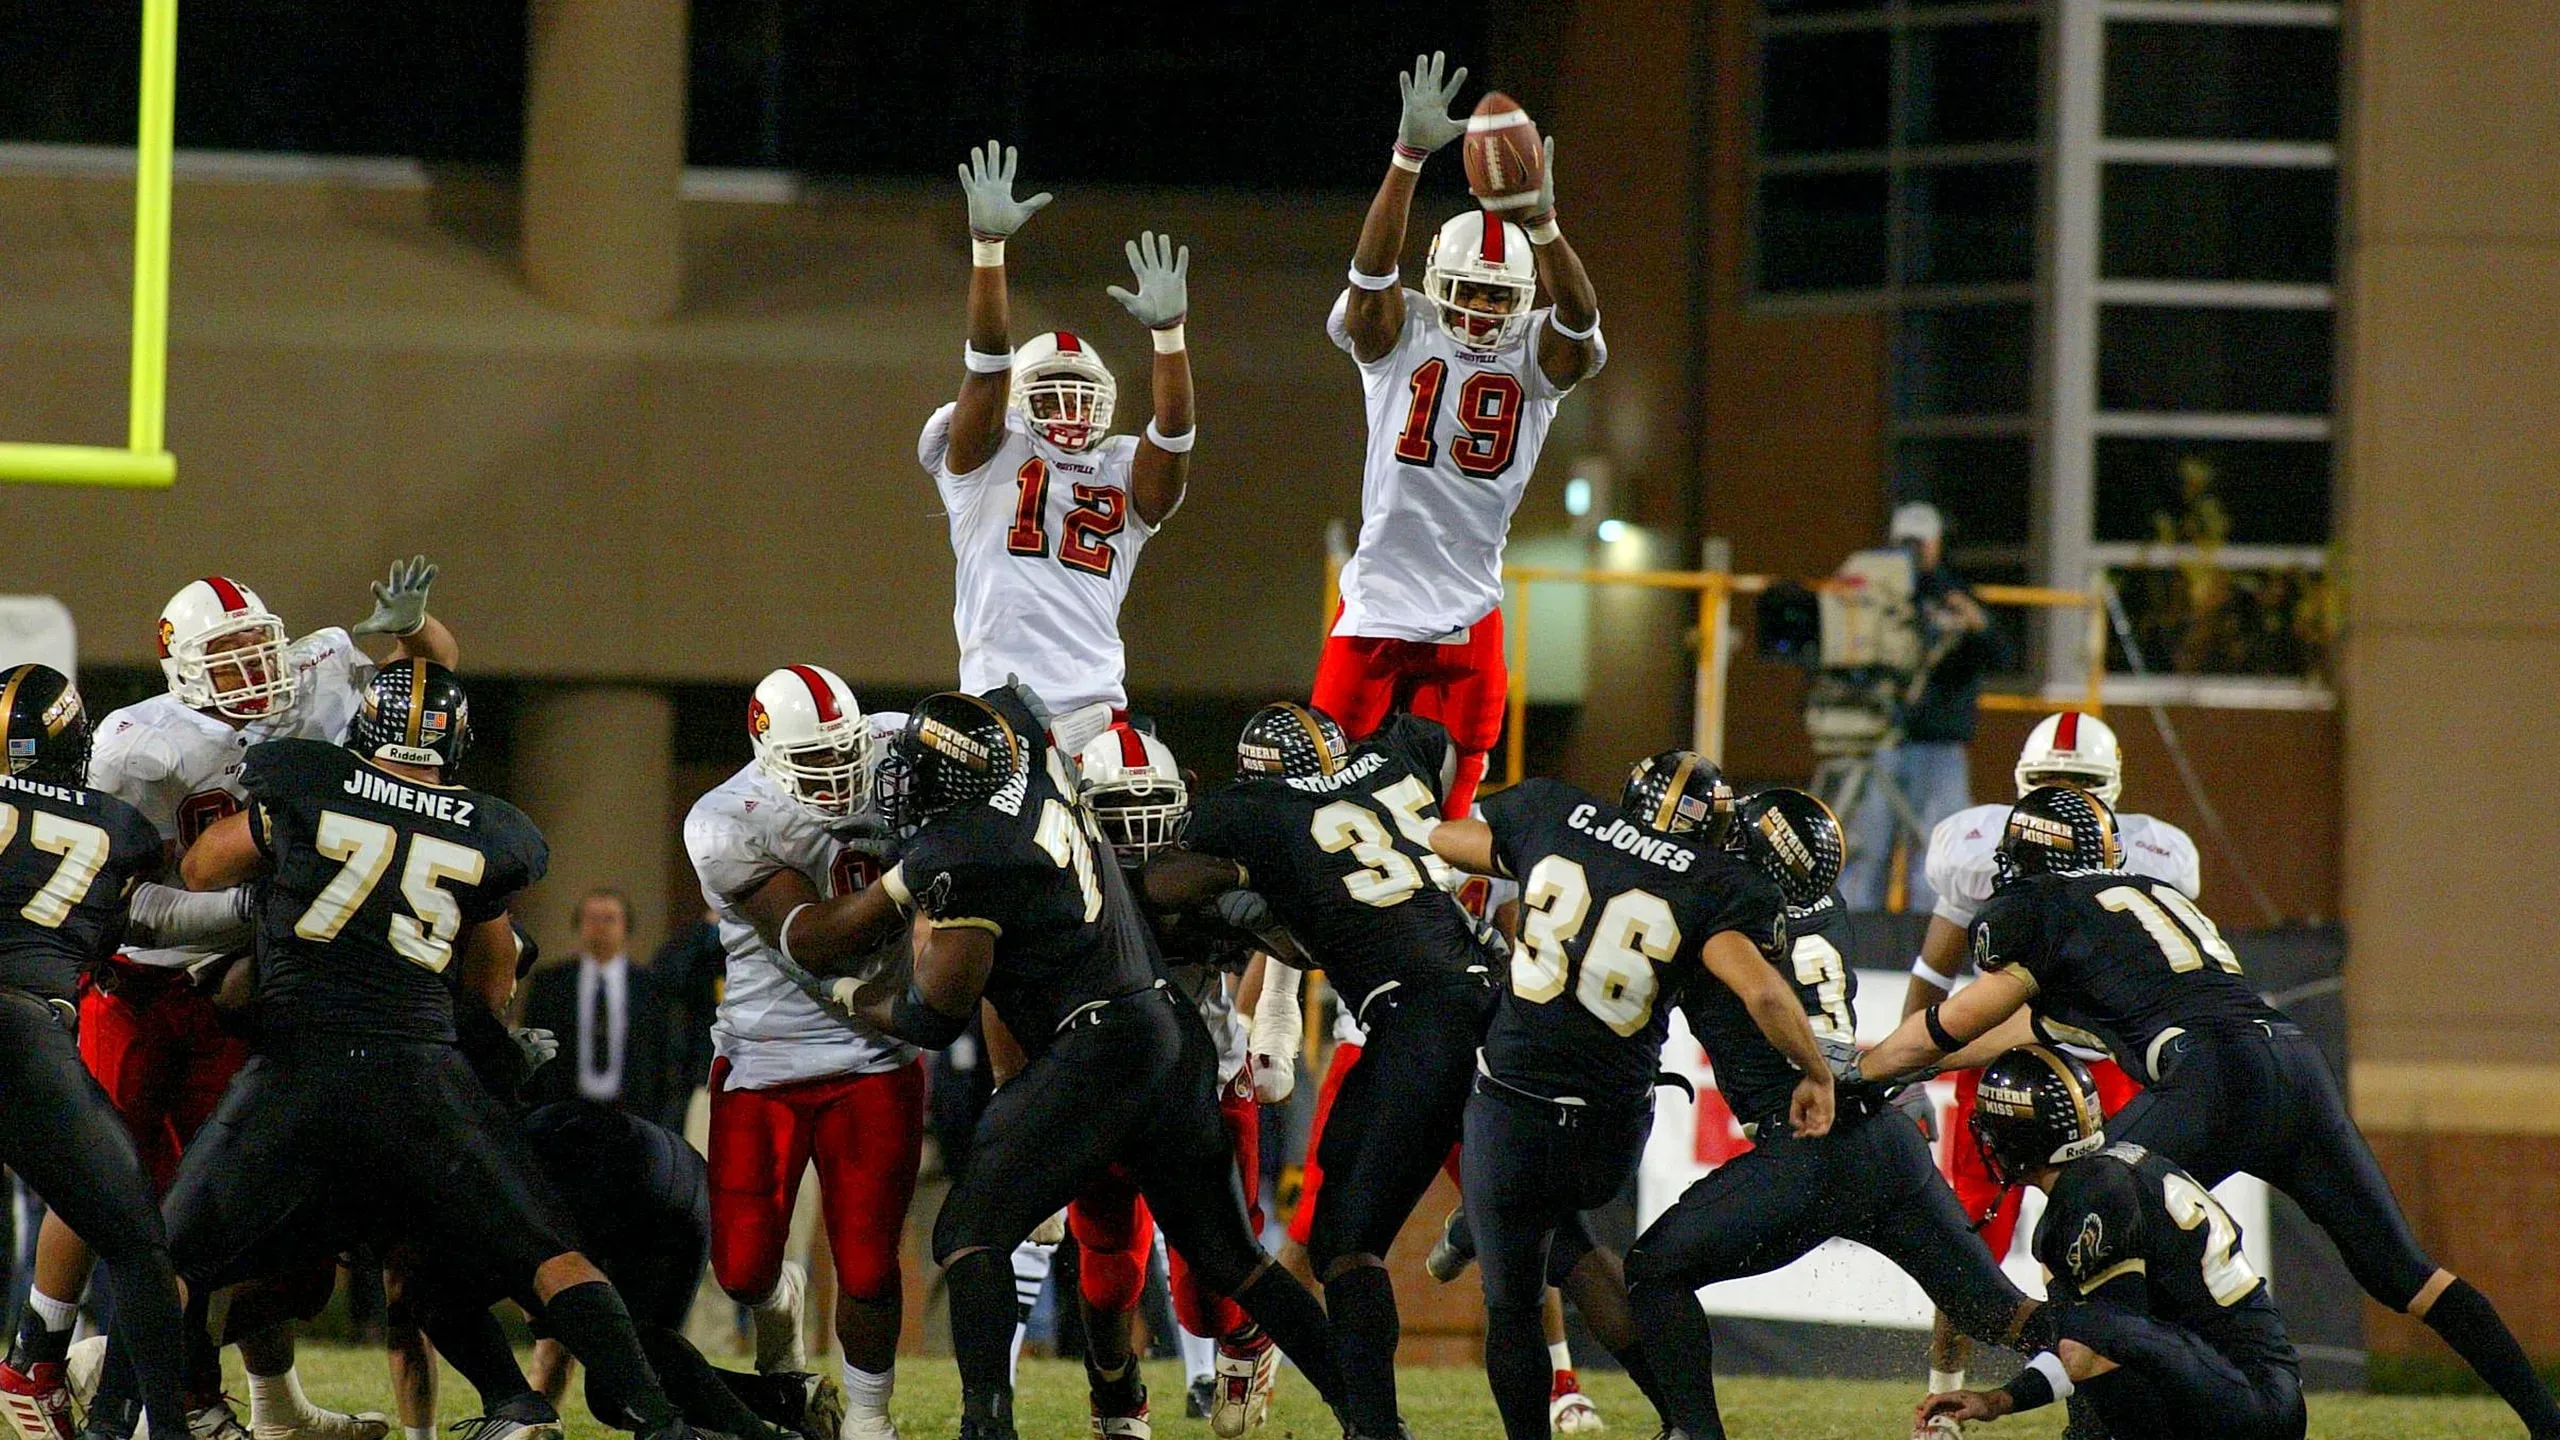 Kerry Rhodes blocks a field goal attempt against Southern Miss